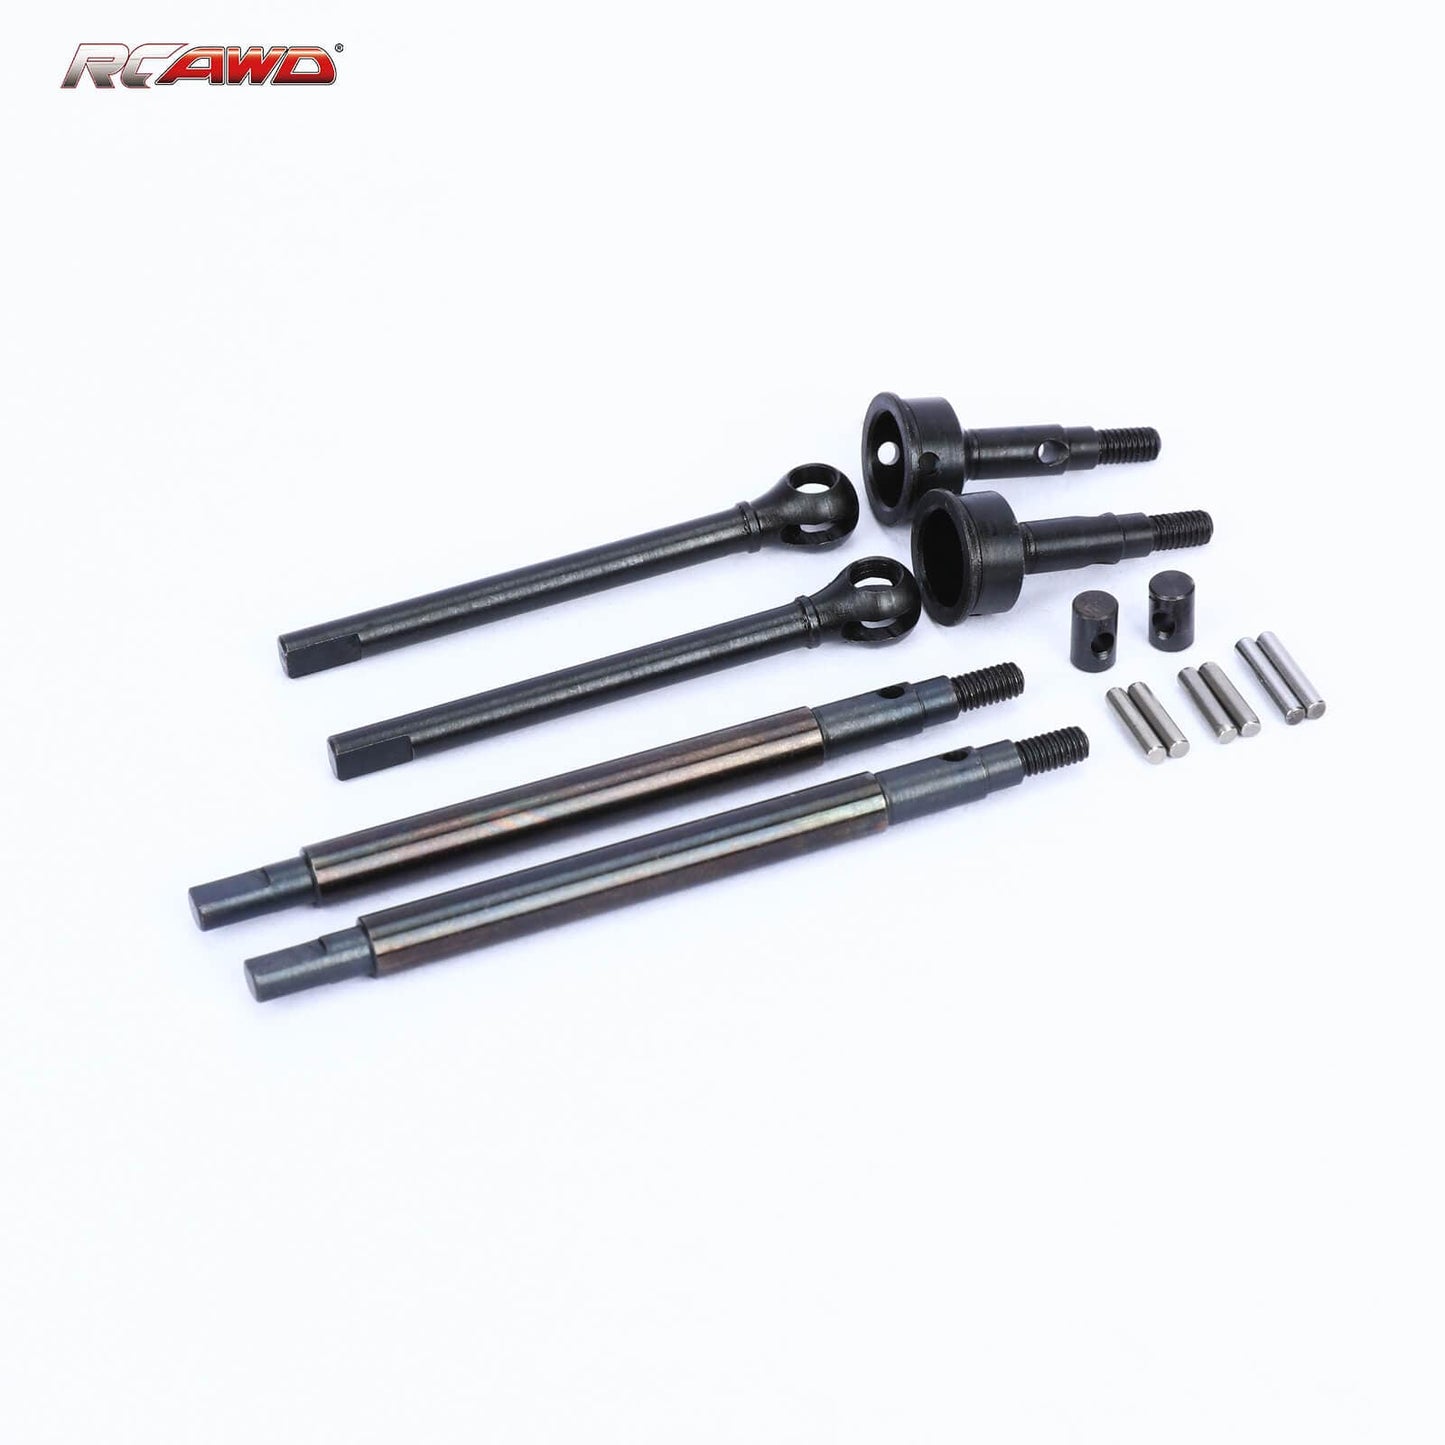 RCAWD TRXXAS TRX4M RCAWD Front Rear Driveshaft Axles for Trx4m Upgrades